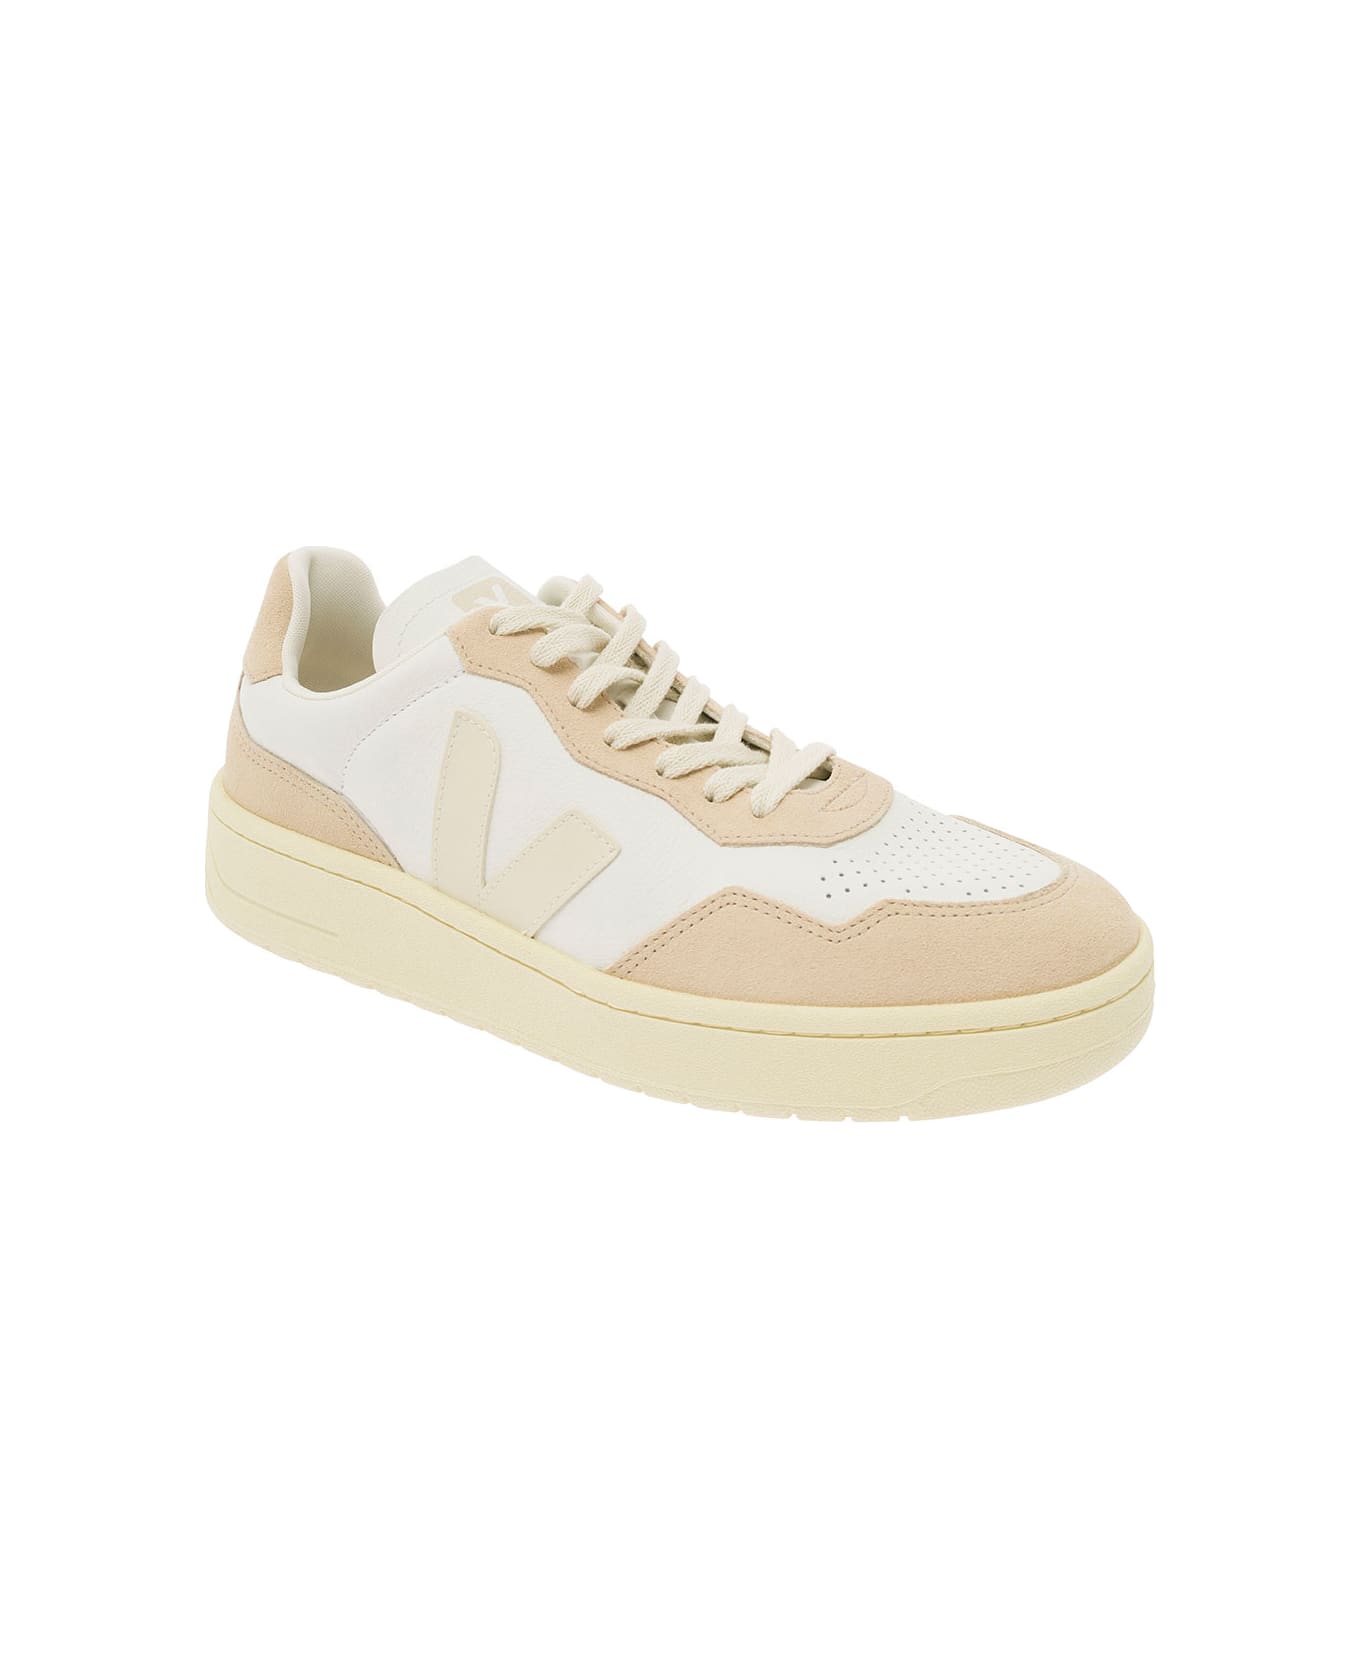 Veja White And Beige Sneakers With Logo Details In Leather Man - Beige スニーカー